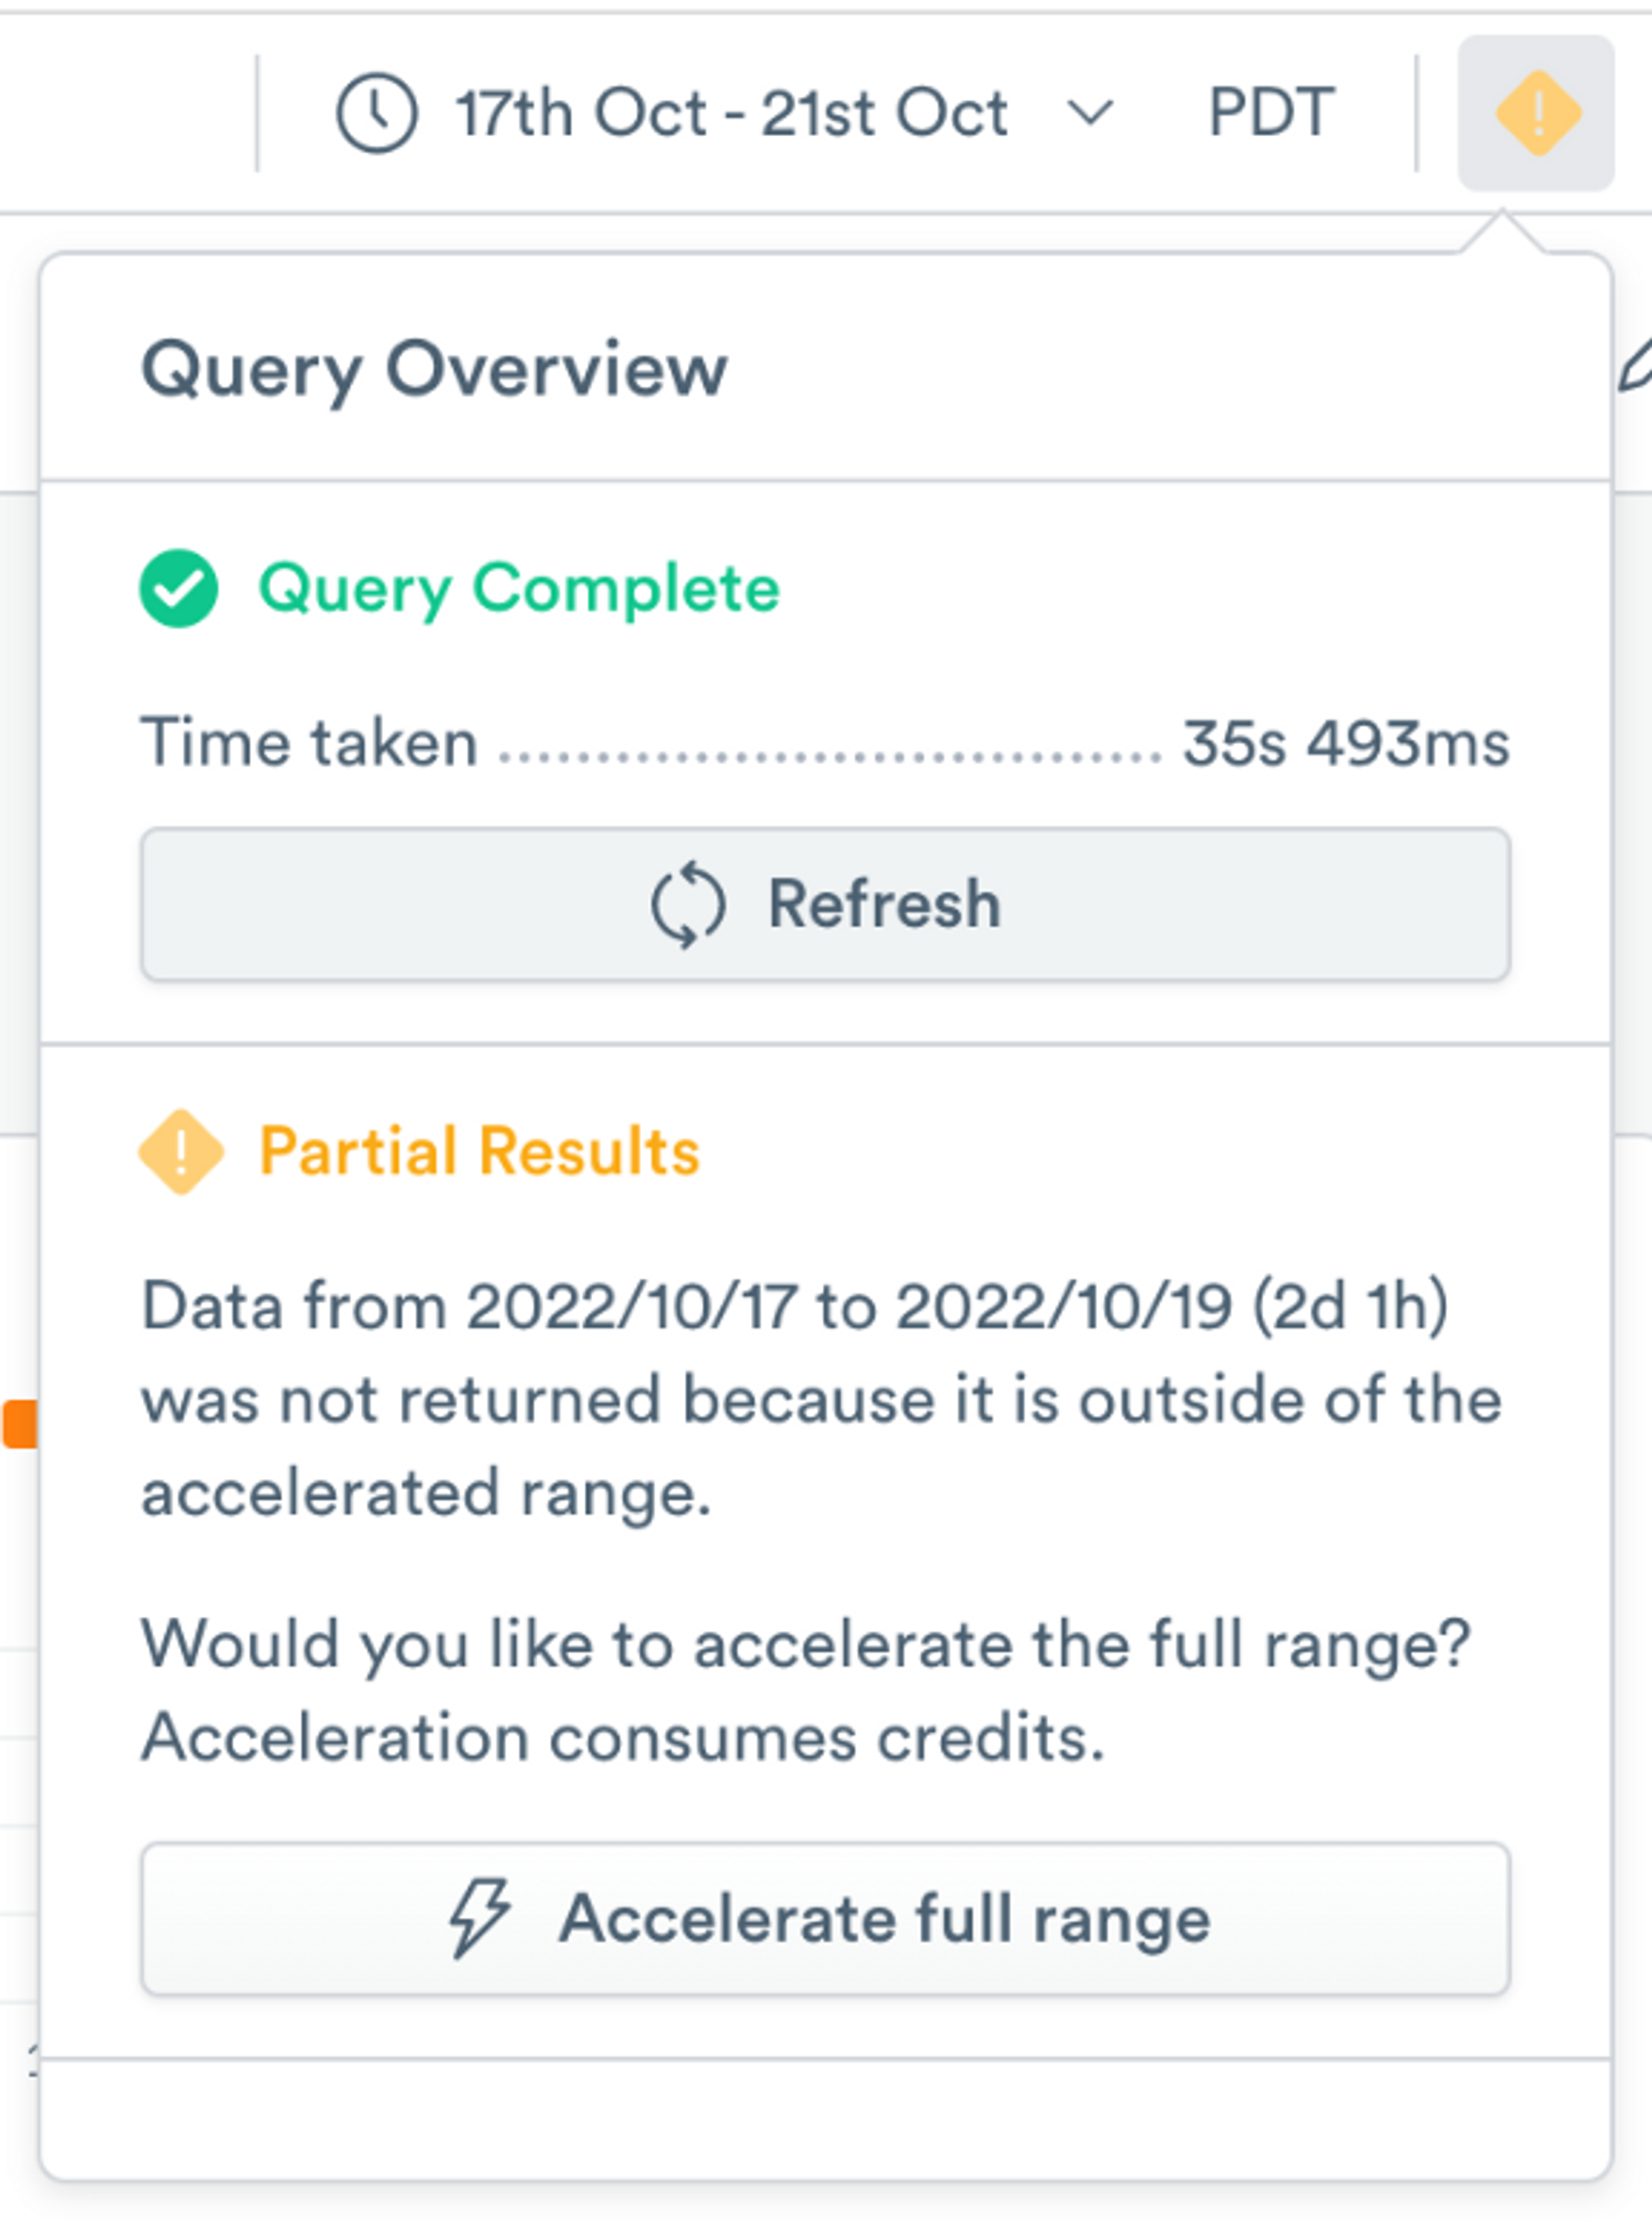 Query Overview dialog showing partial results. The Accelerate full range button is available.